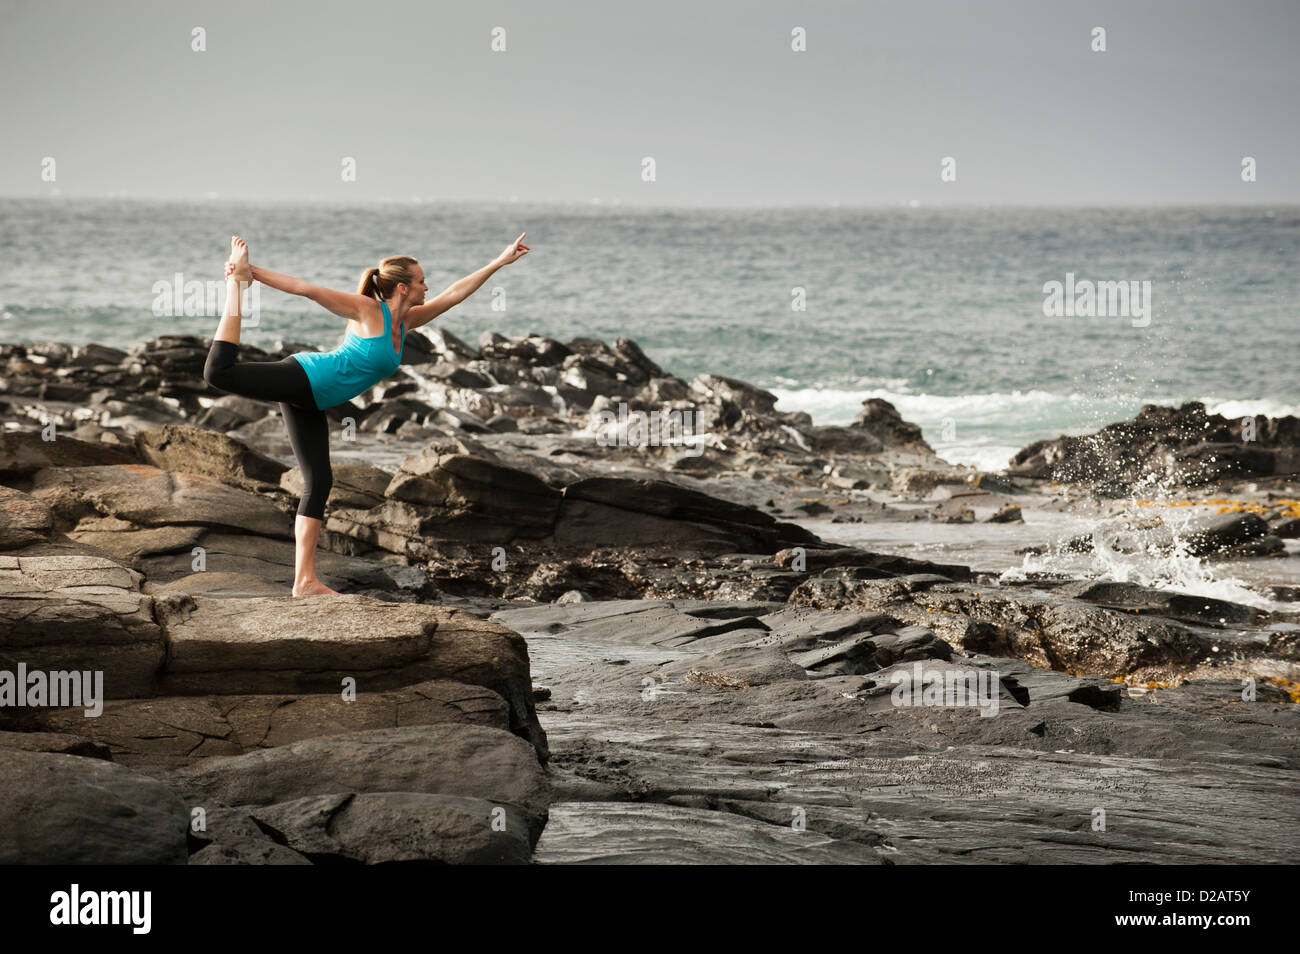 Woman practicing yoga on rock formation Banque D'Images